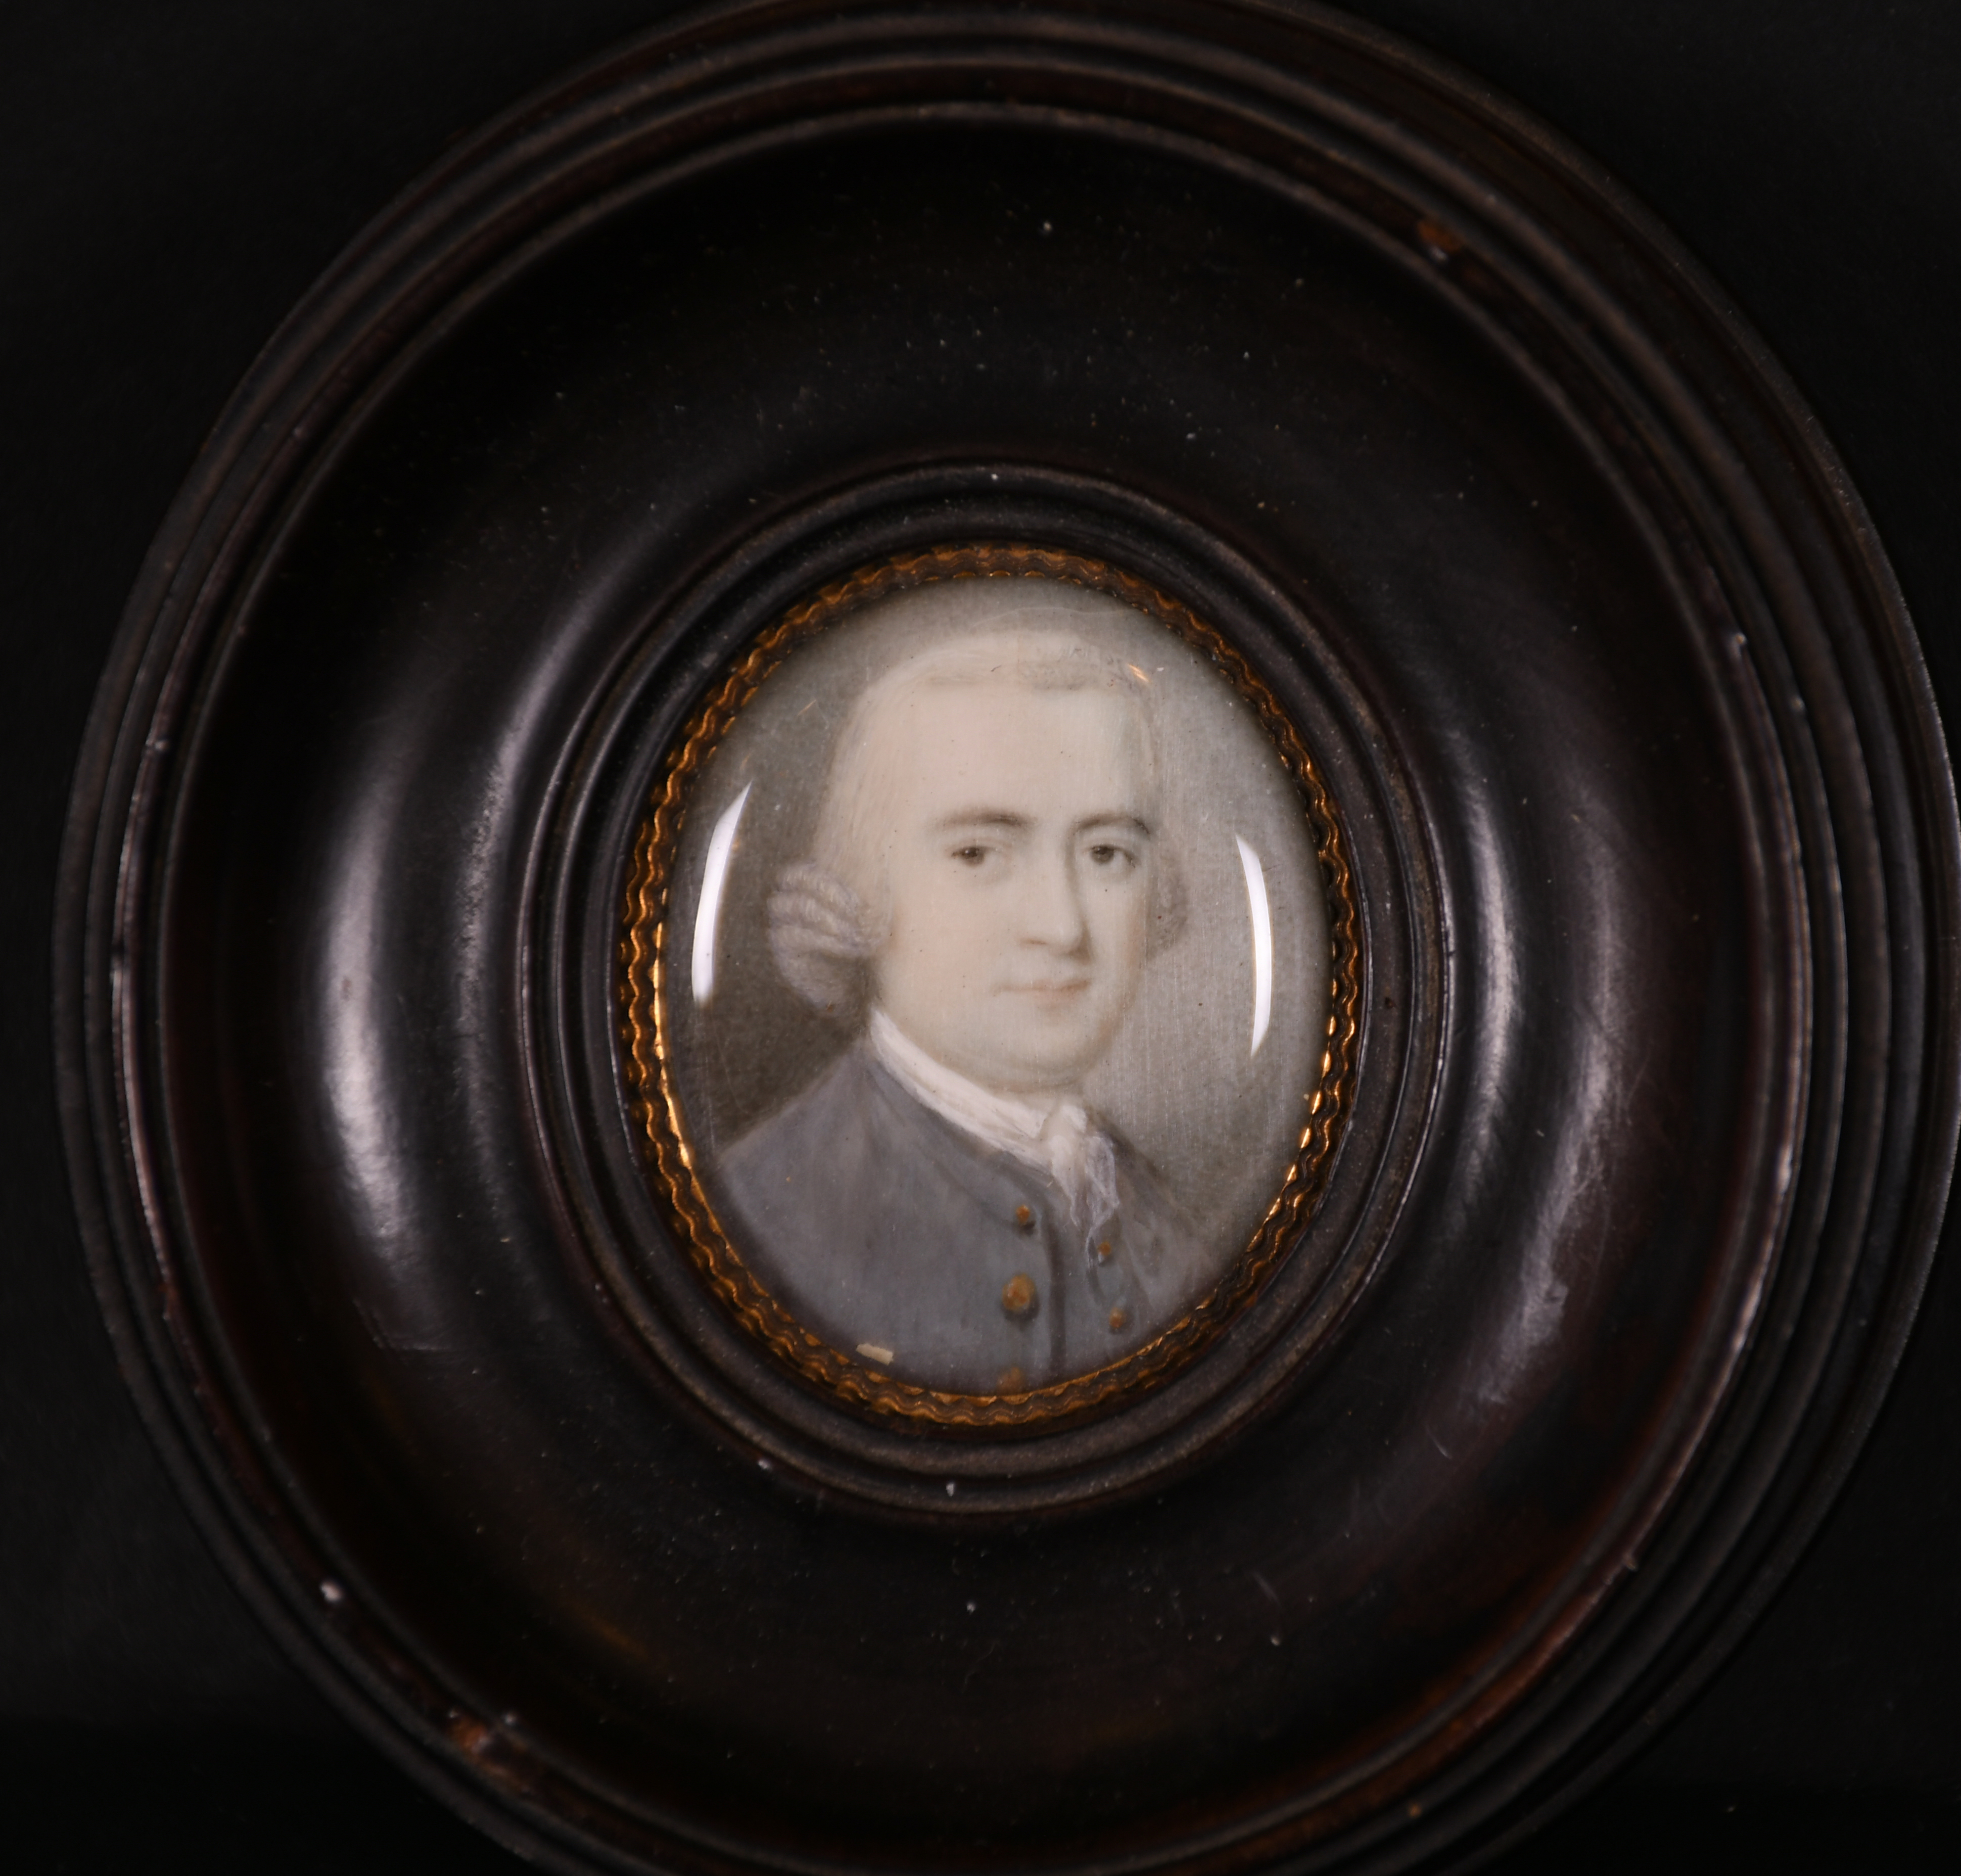 18th Century English School. Portrait of “Timothy Curtiss, 22 Years of Age, on His Wedding Day”, - Image 2 of 3